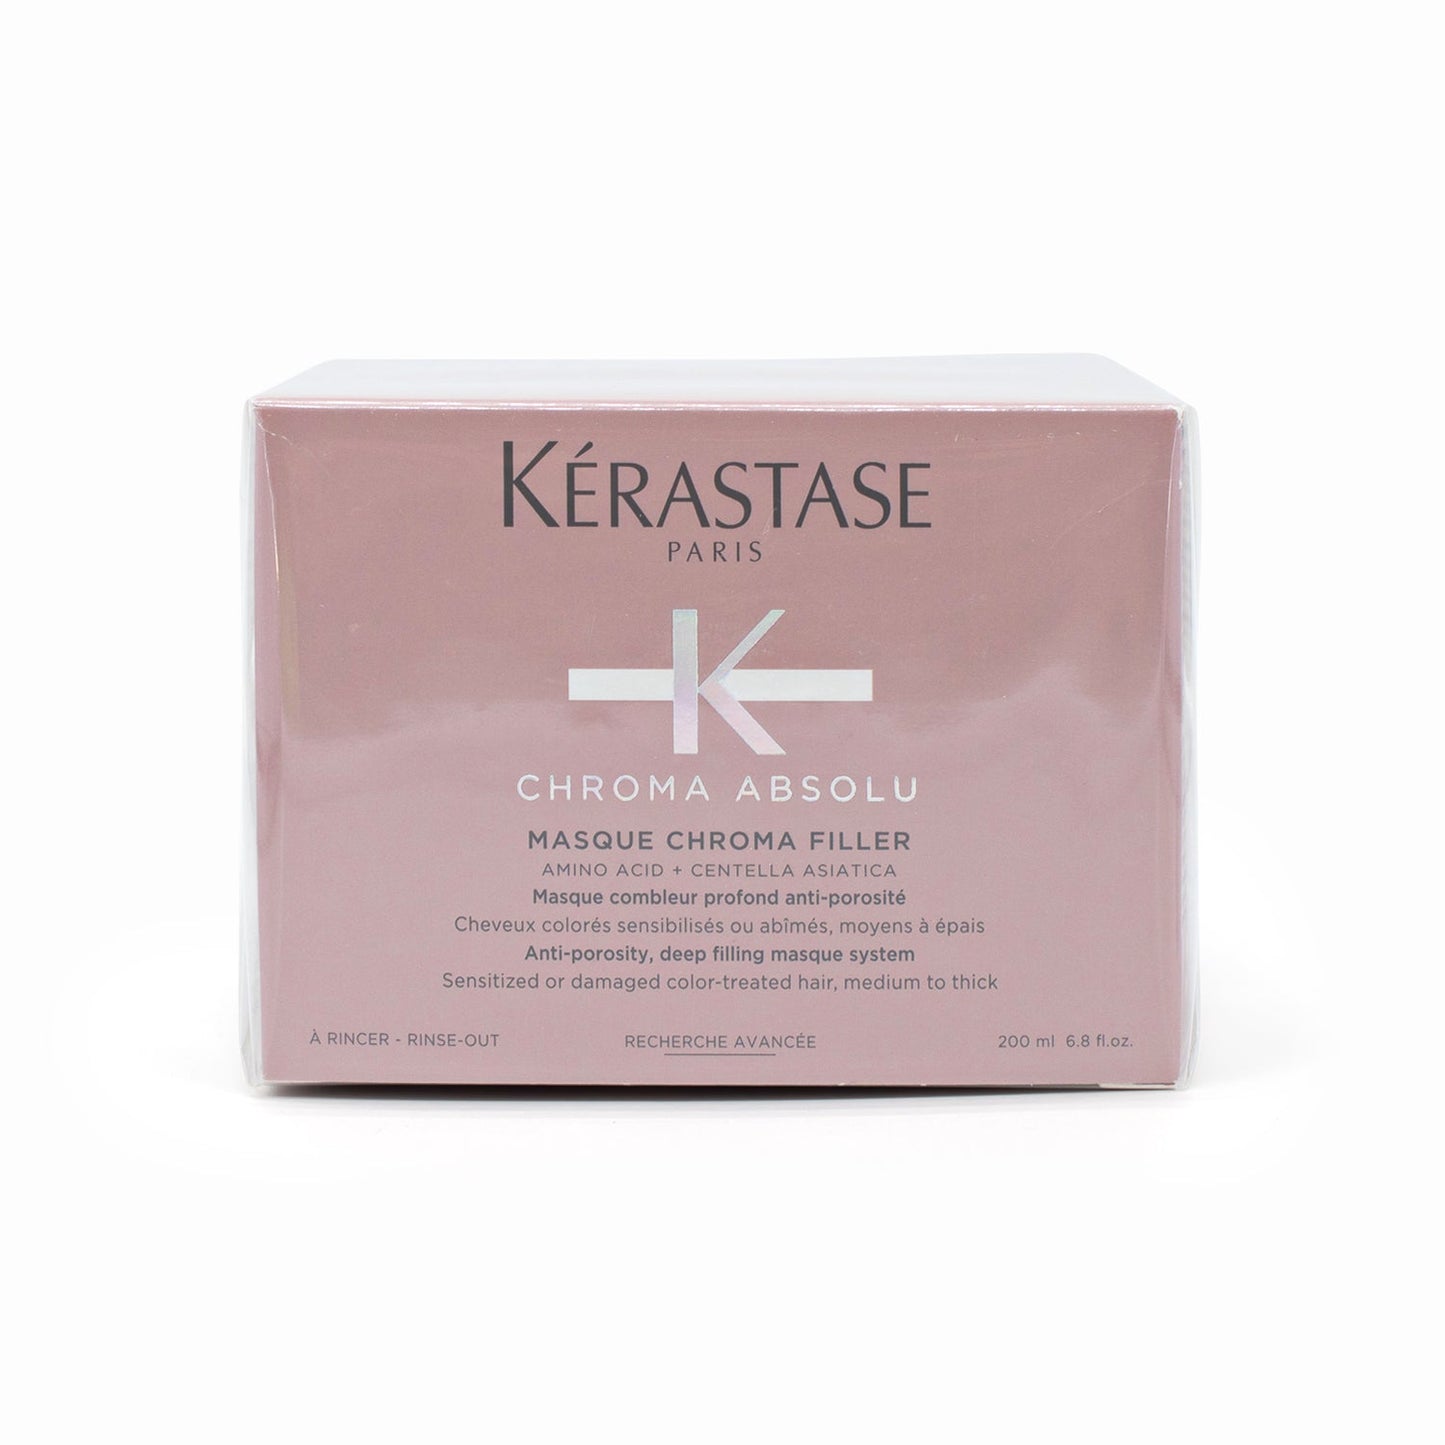 KERASTASE Chroma Absolu Deep Filling Mask for Color-Treated Hair 6.8oz - Imperfect Box